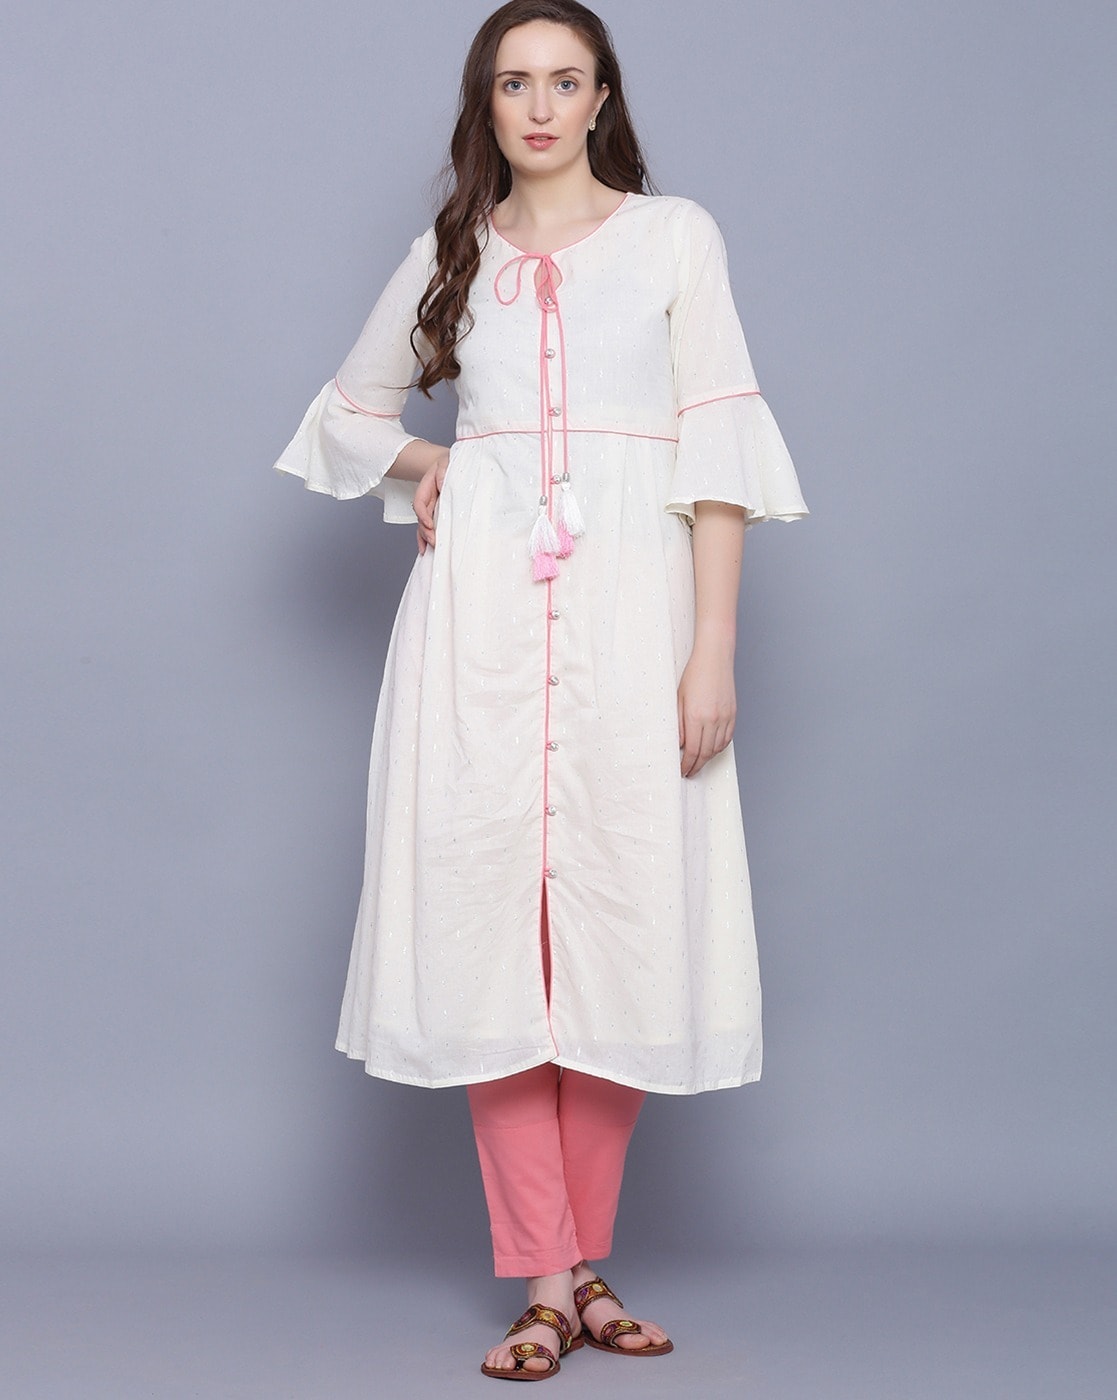 Experience more than 151 bell sleeves kurti best